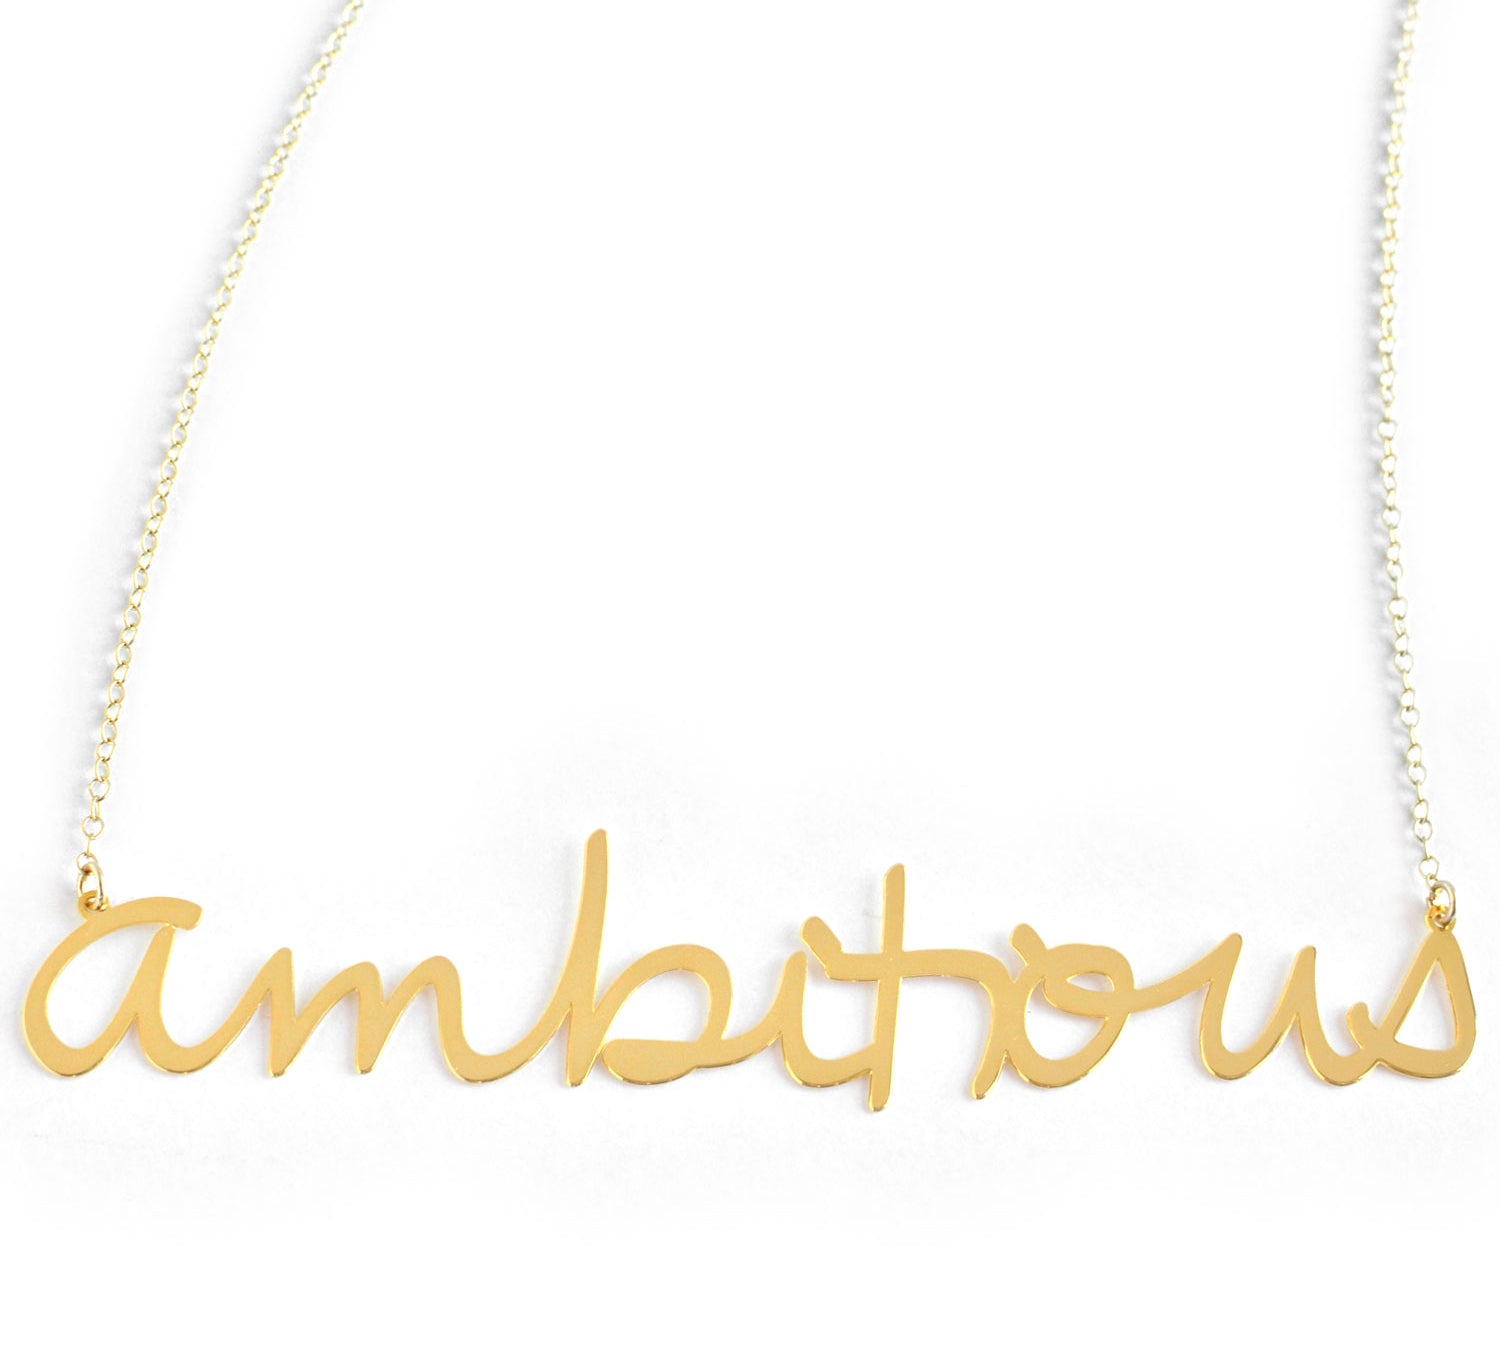 Ambitious Necklace - High Quality, Affordable, Hand Written, Empowering, Self Love, Mantra Word Necklace - Available in Gold and Silver - Small and Large Sizes - Made in USA - Brevity Jewelry